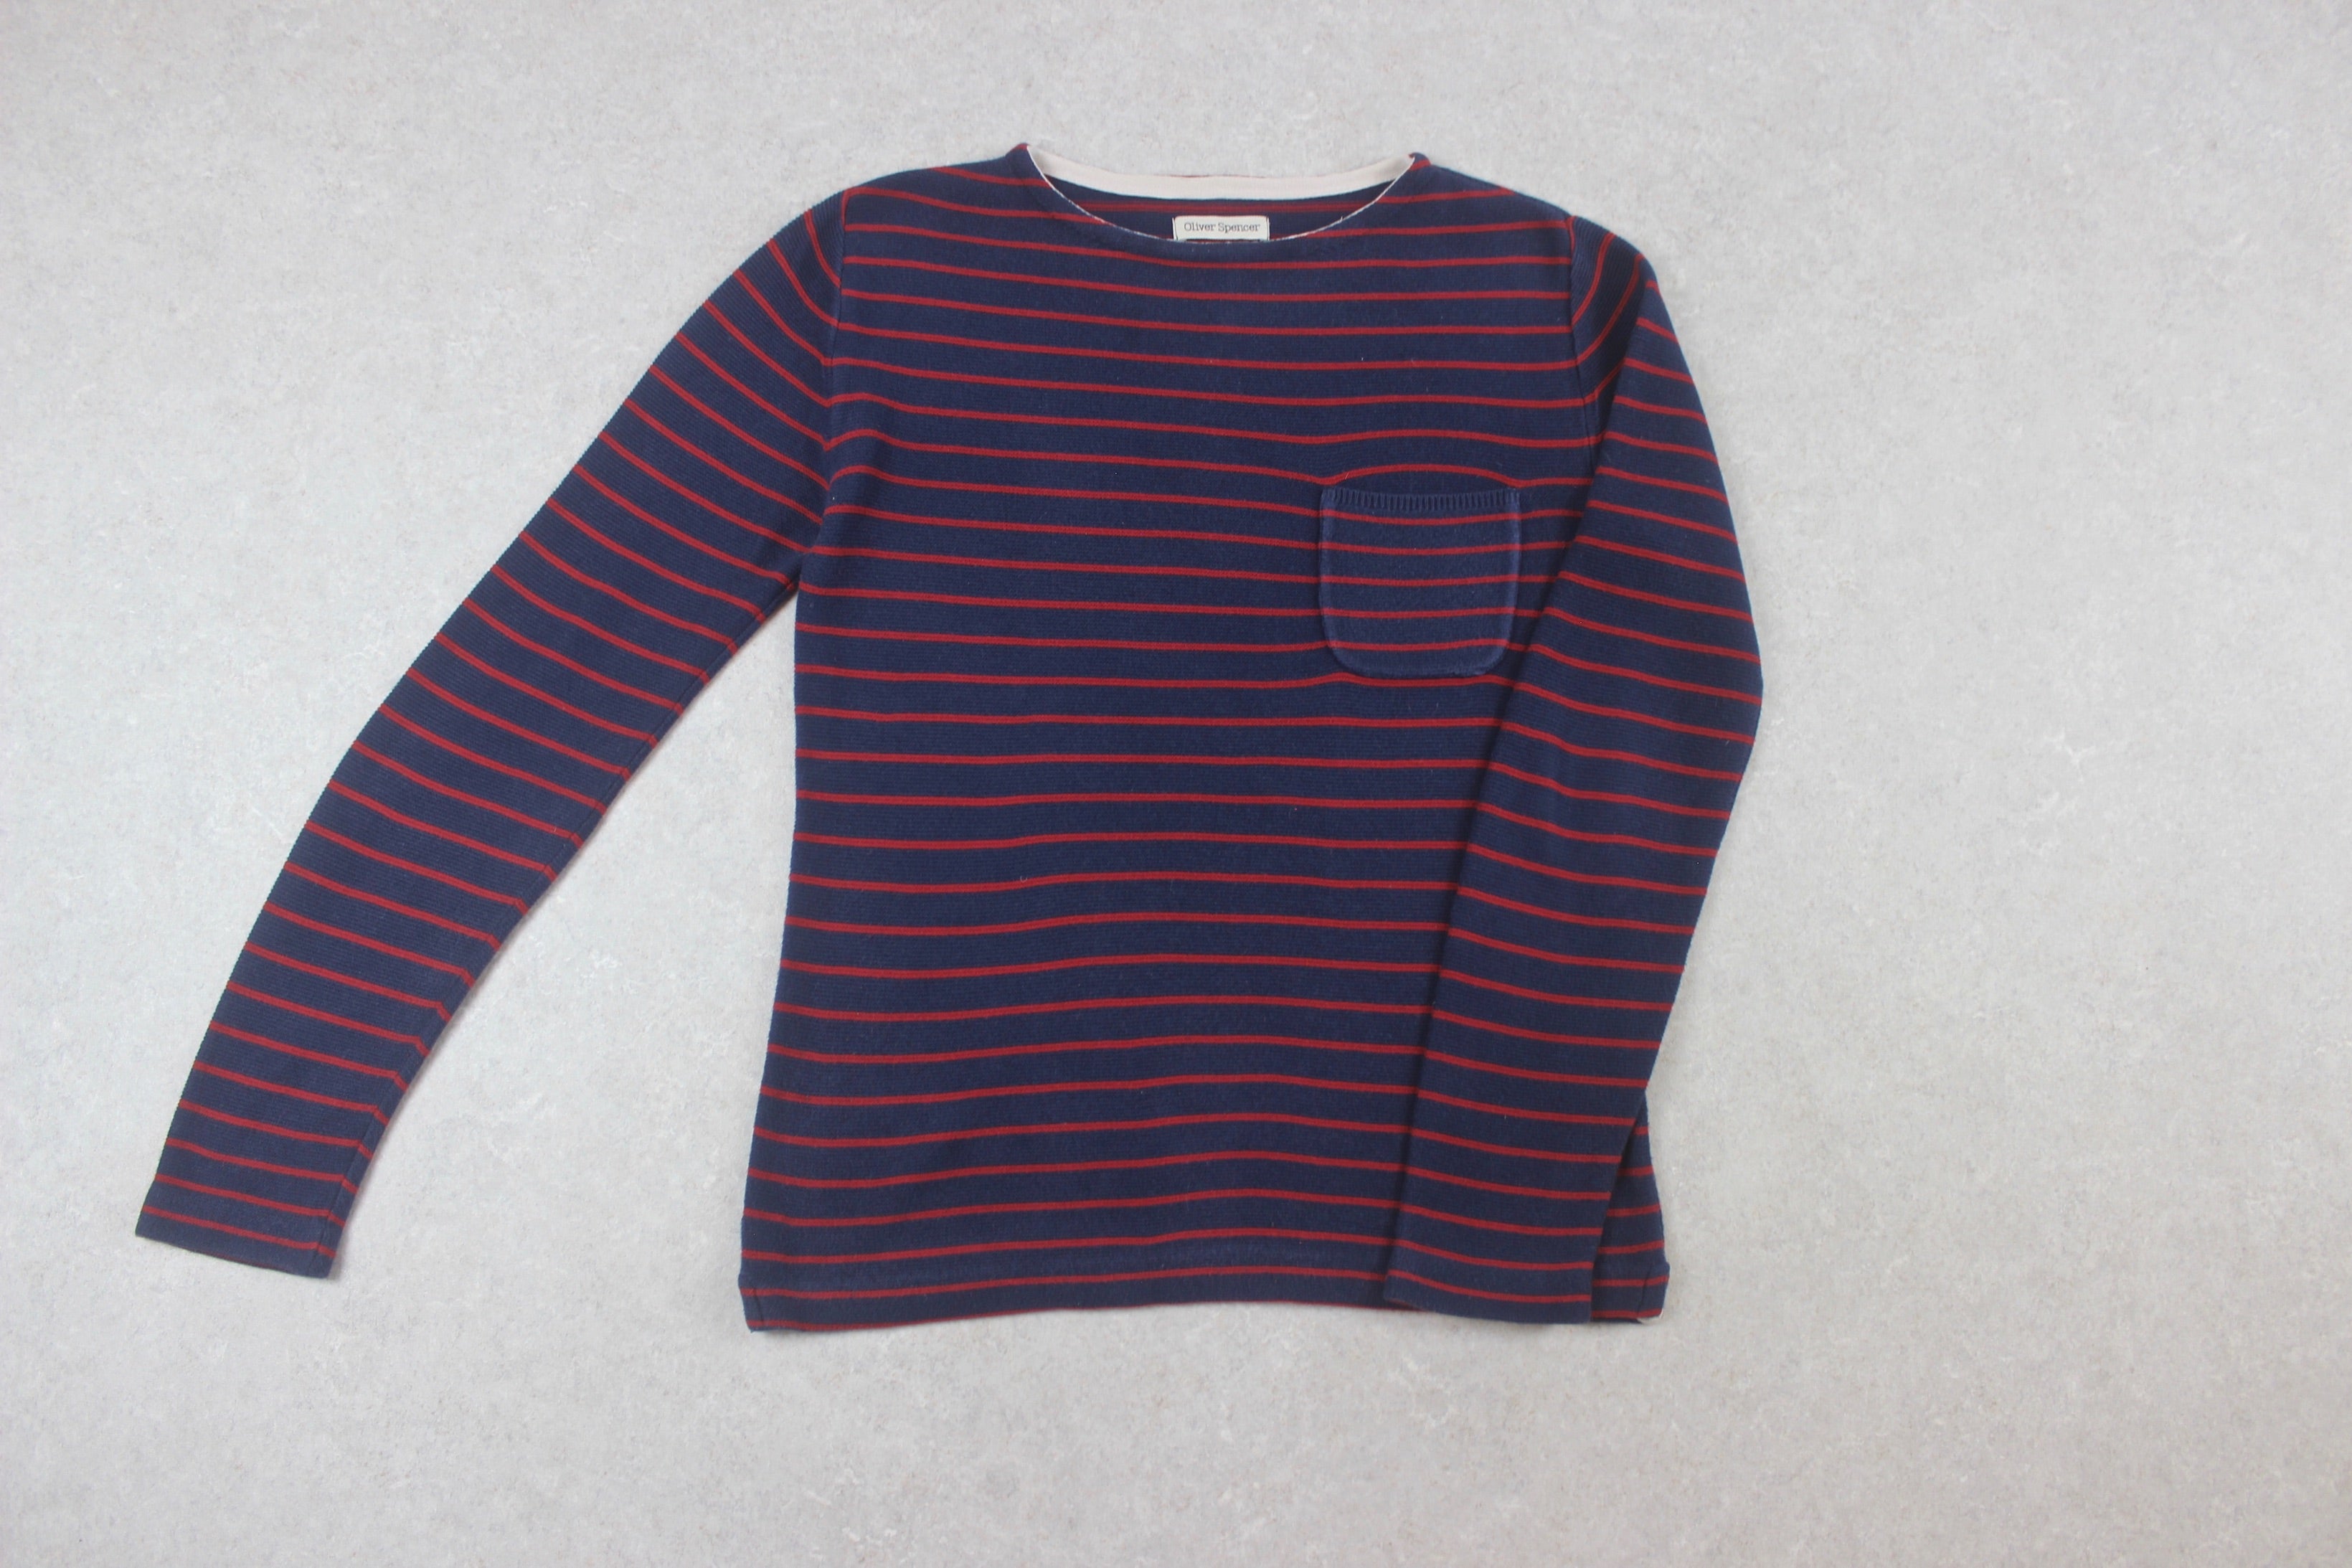 Oliver Spencer - Knit Jumper - Navy Blue/Red Stripe - XXS Extra Small